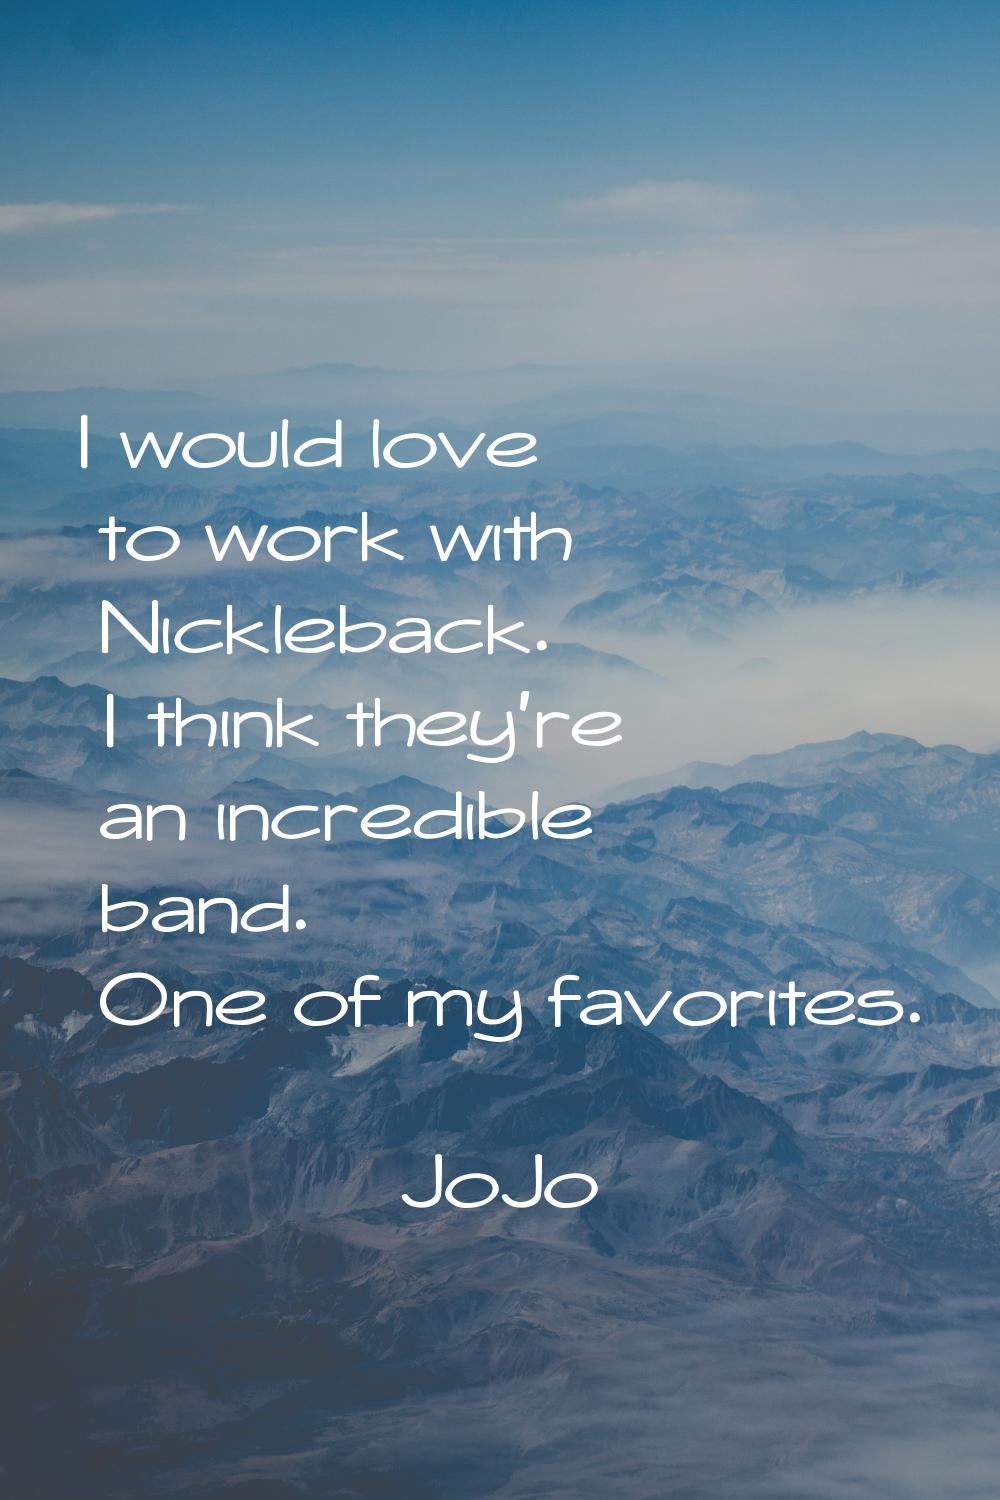 I would love to work with Nickleback. I think they're an incredible band. One of my favorites.